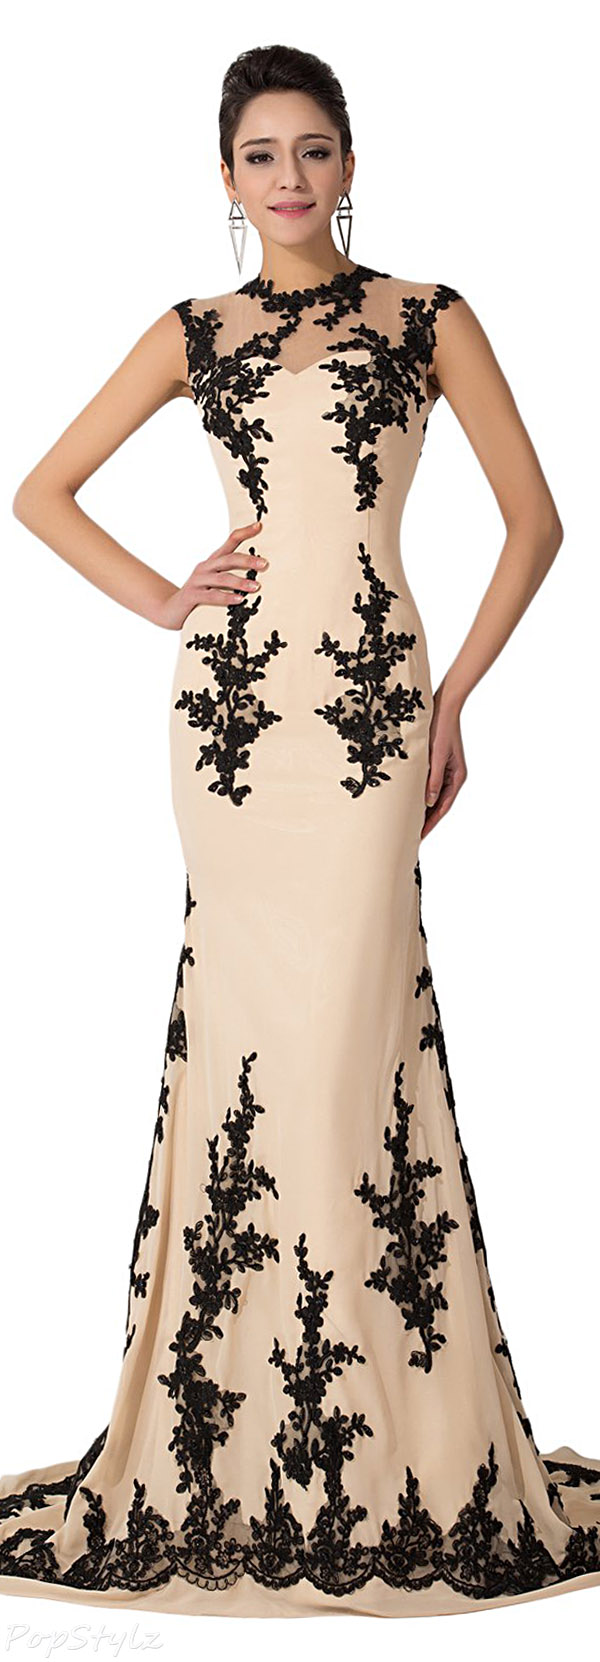 Sunvary Champagne & Black Lace Applique Mermaid Gown